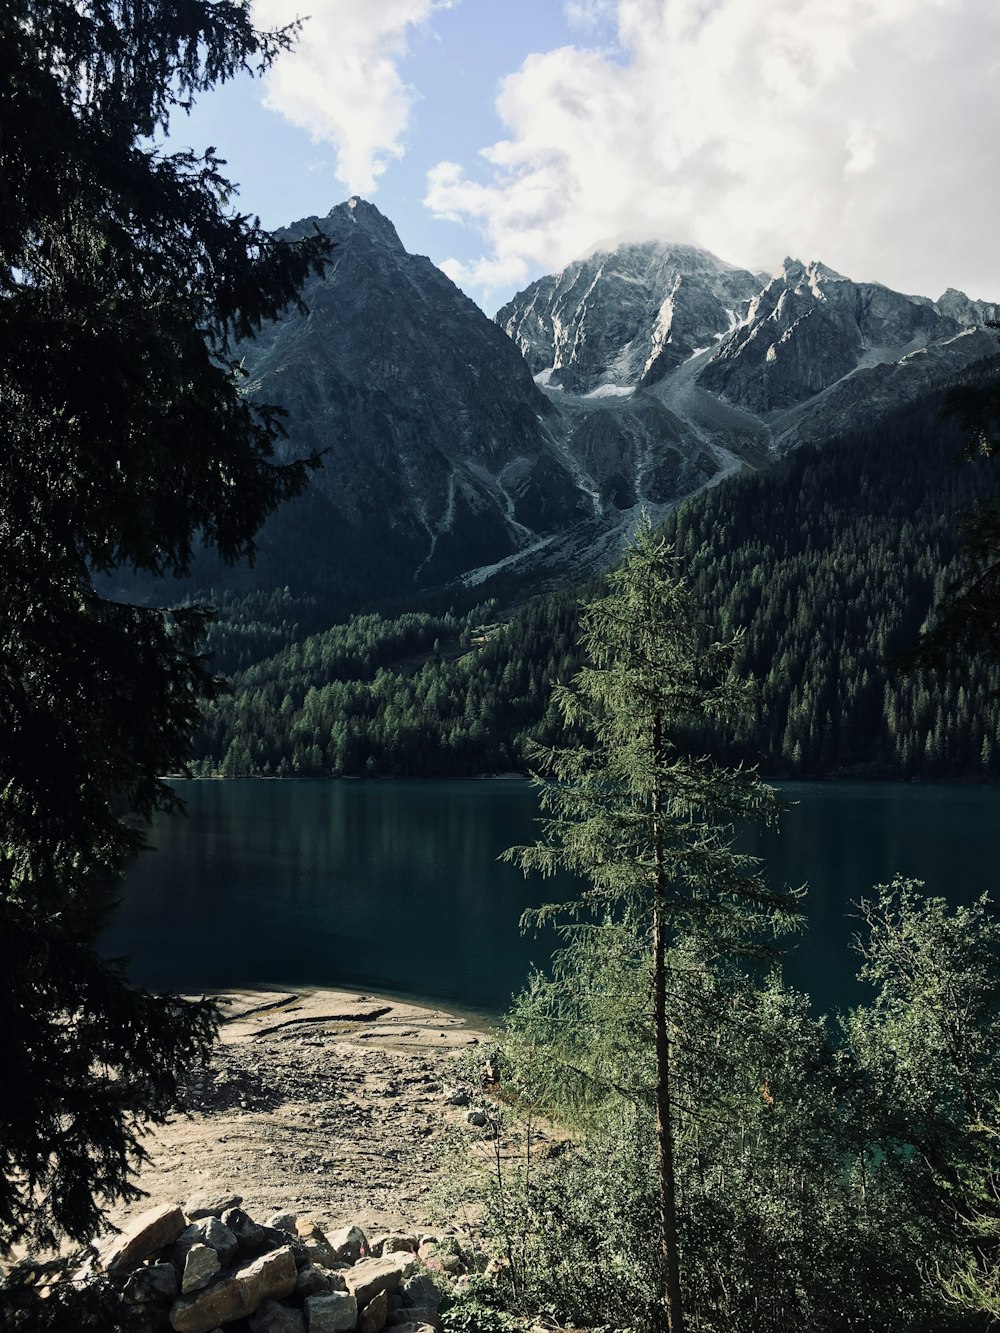 body of water and mountains surrounded by green leaf trees